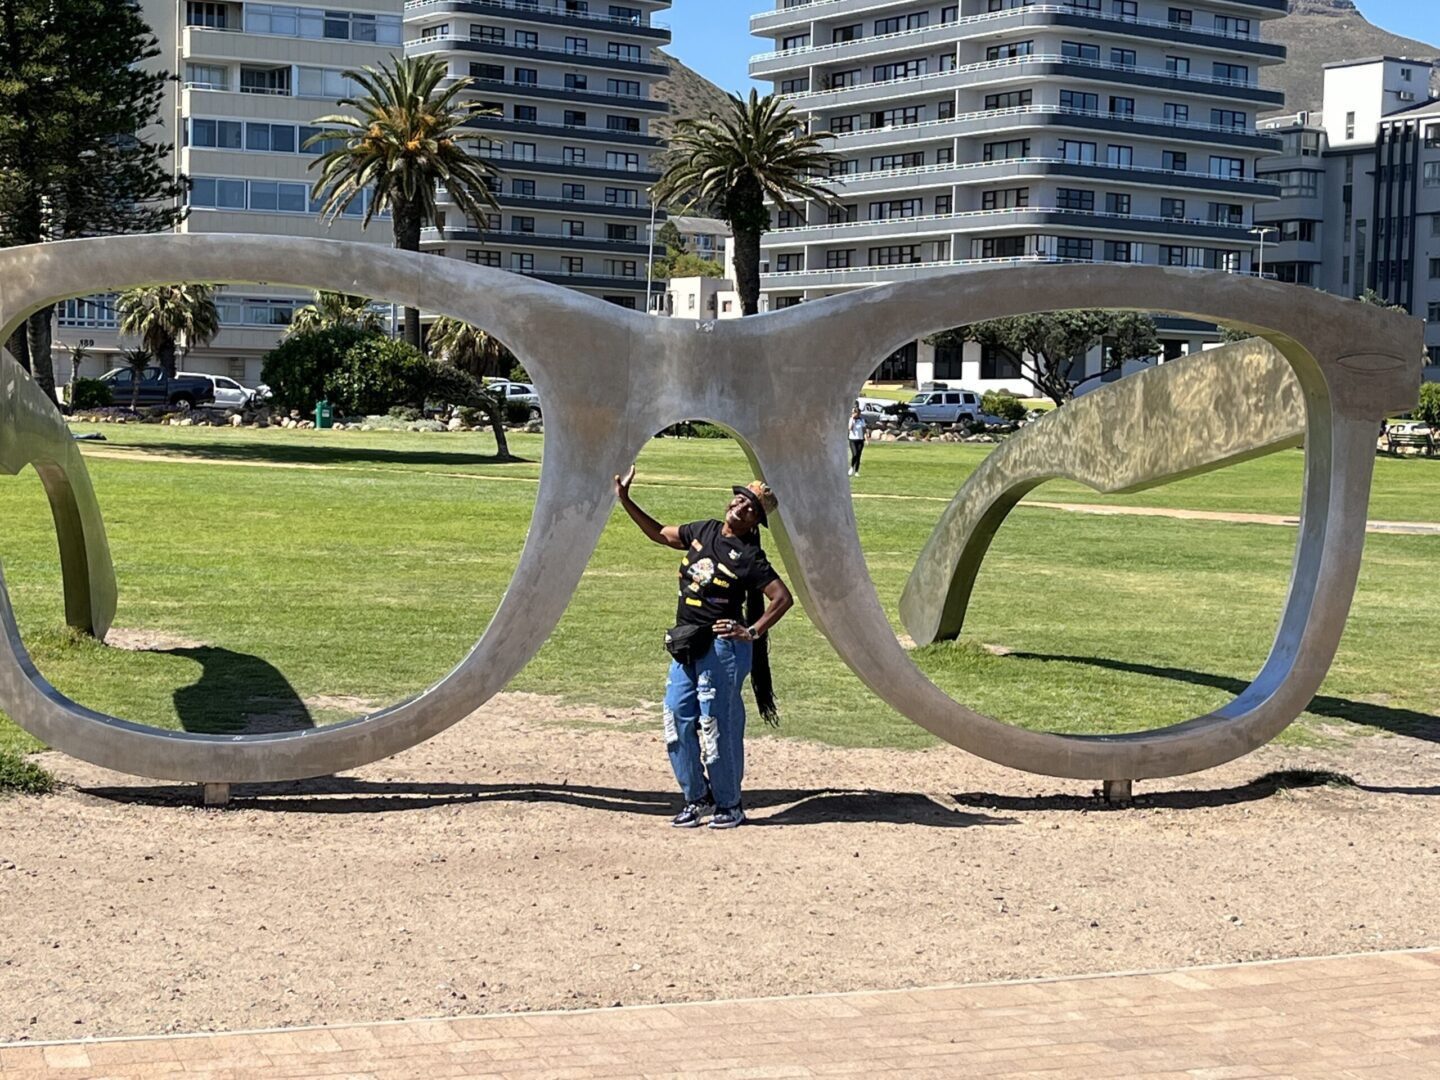 A woman standing in front of an outdoor sculpture.